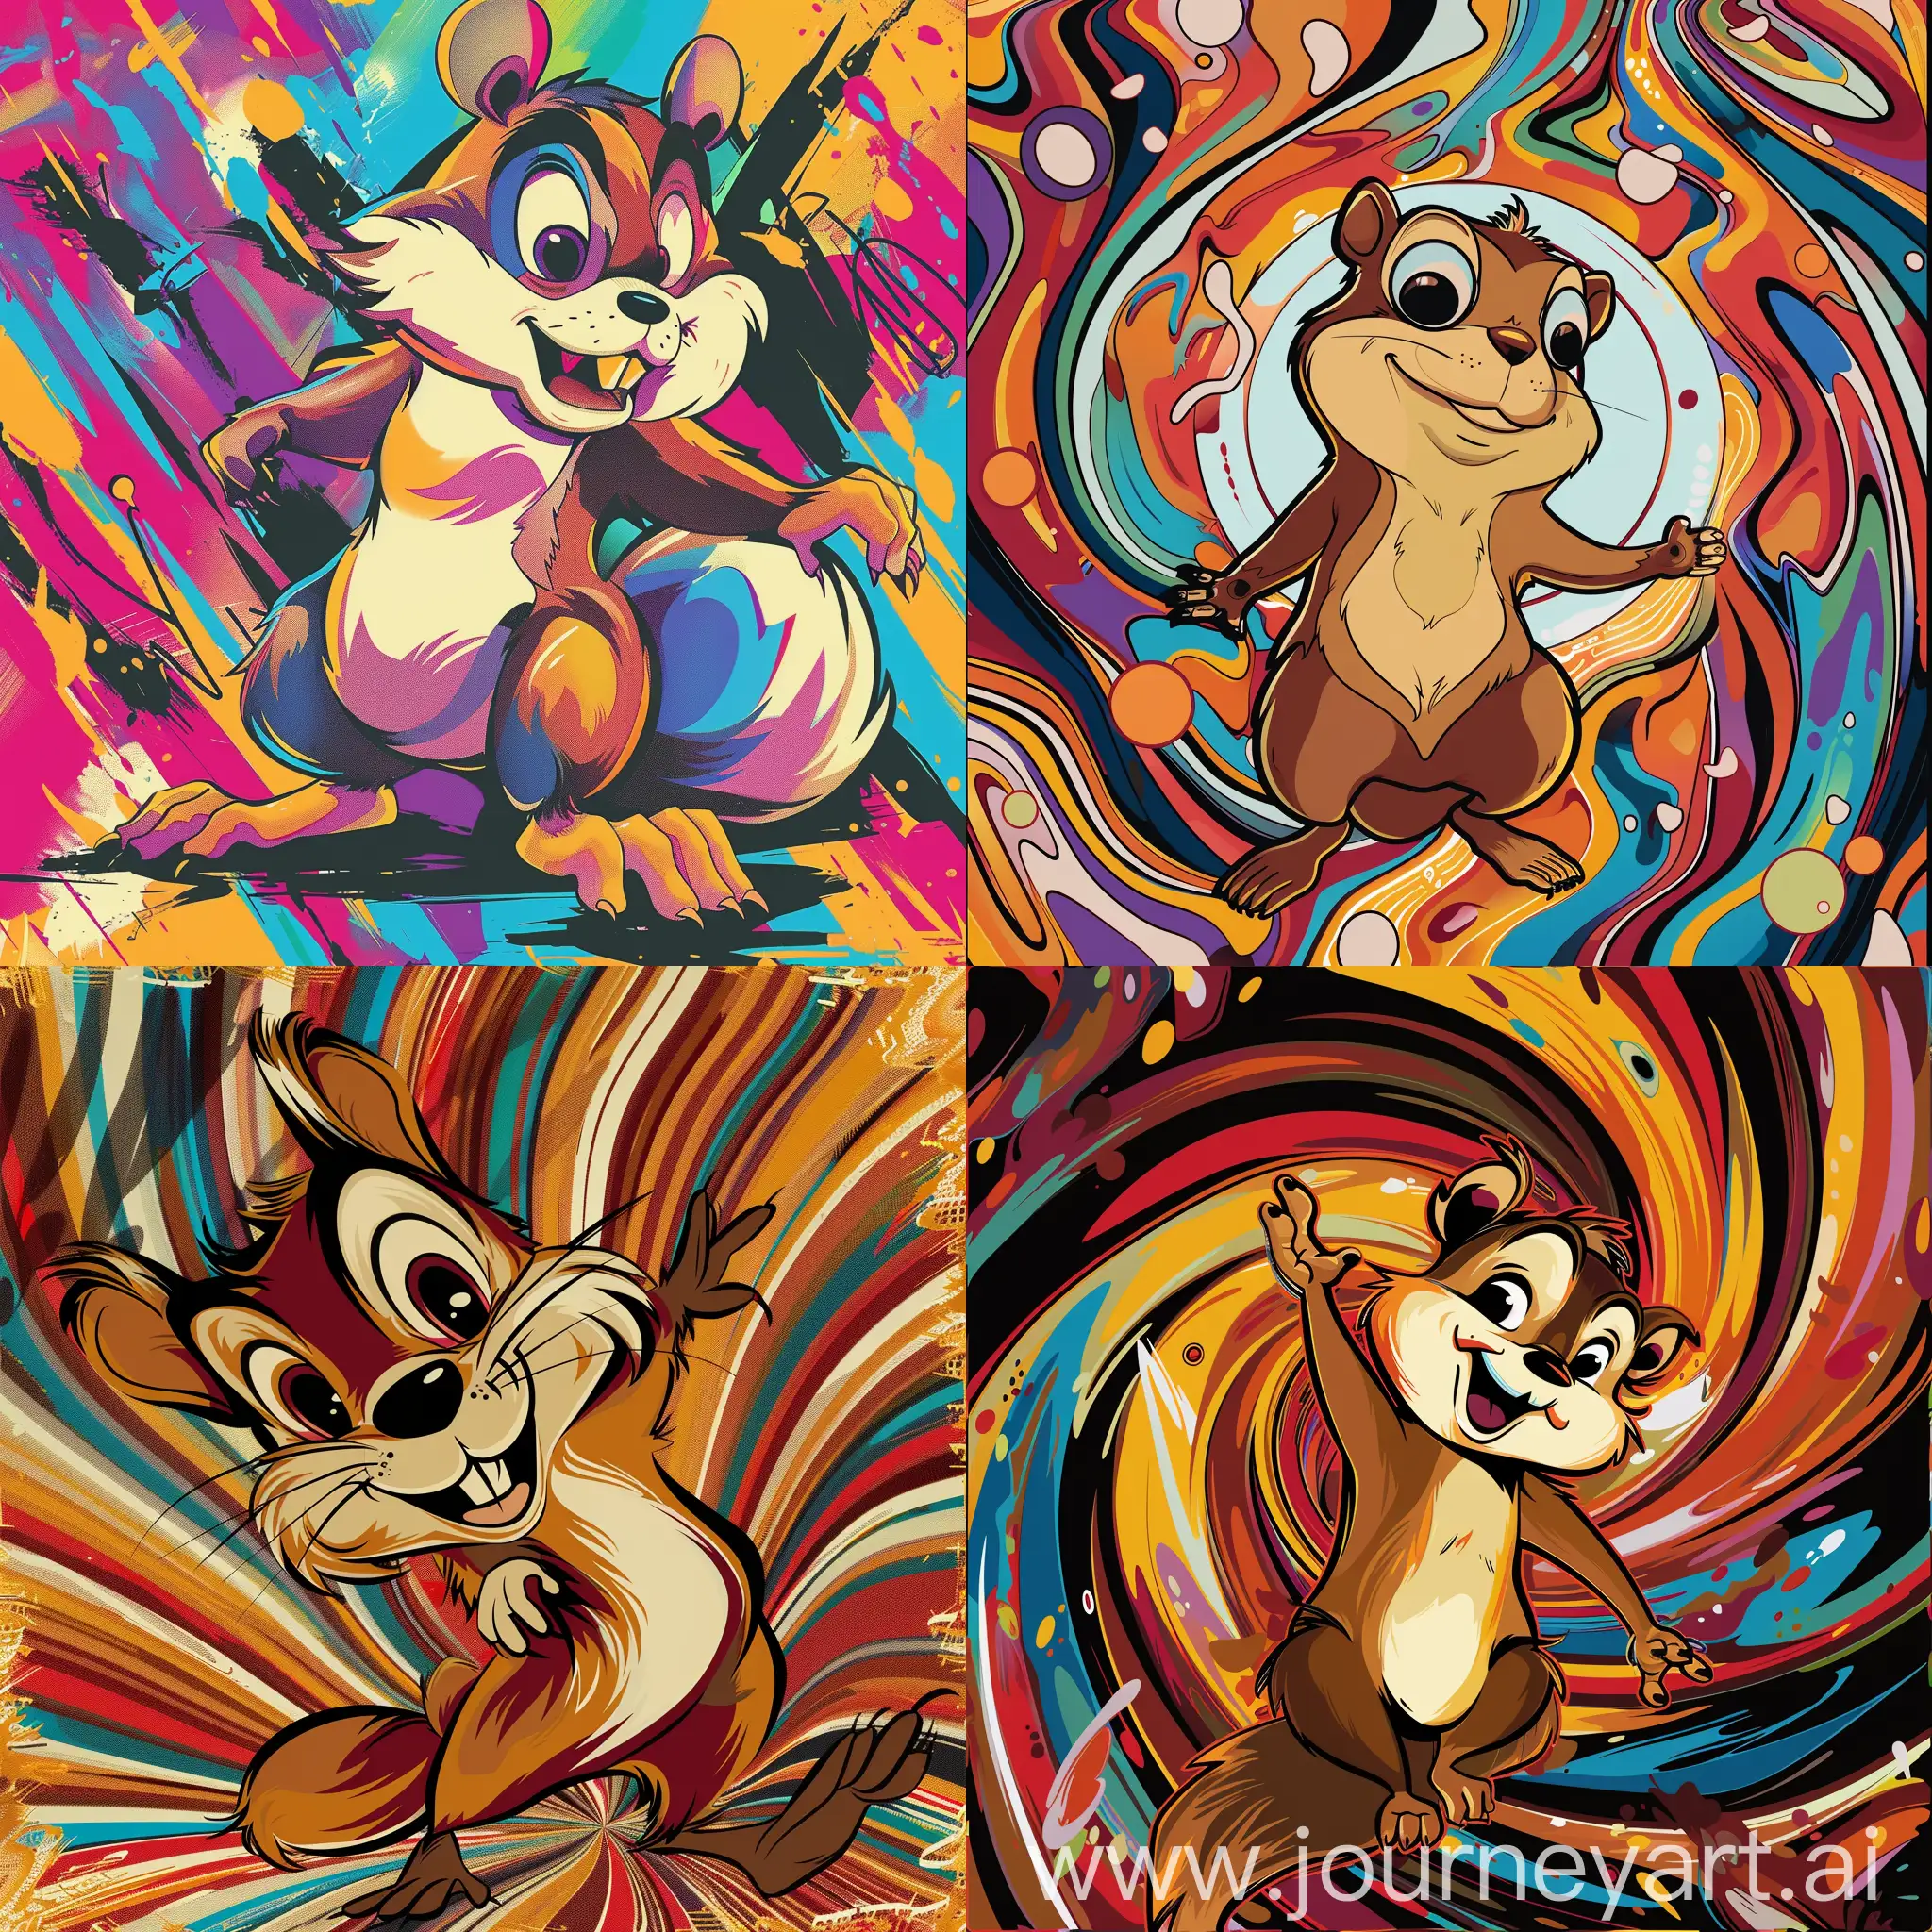 CD art cover in the style "furries in a blender" with a chipmunk in a funky pose
with a proude face